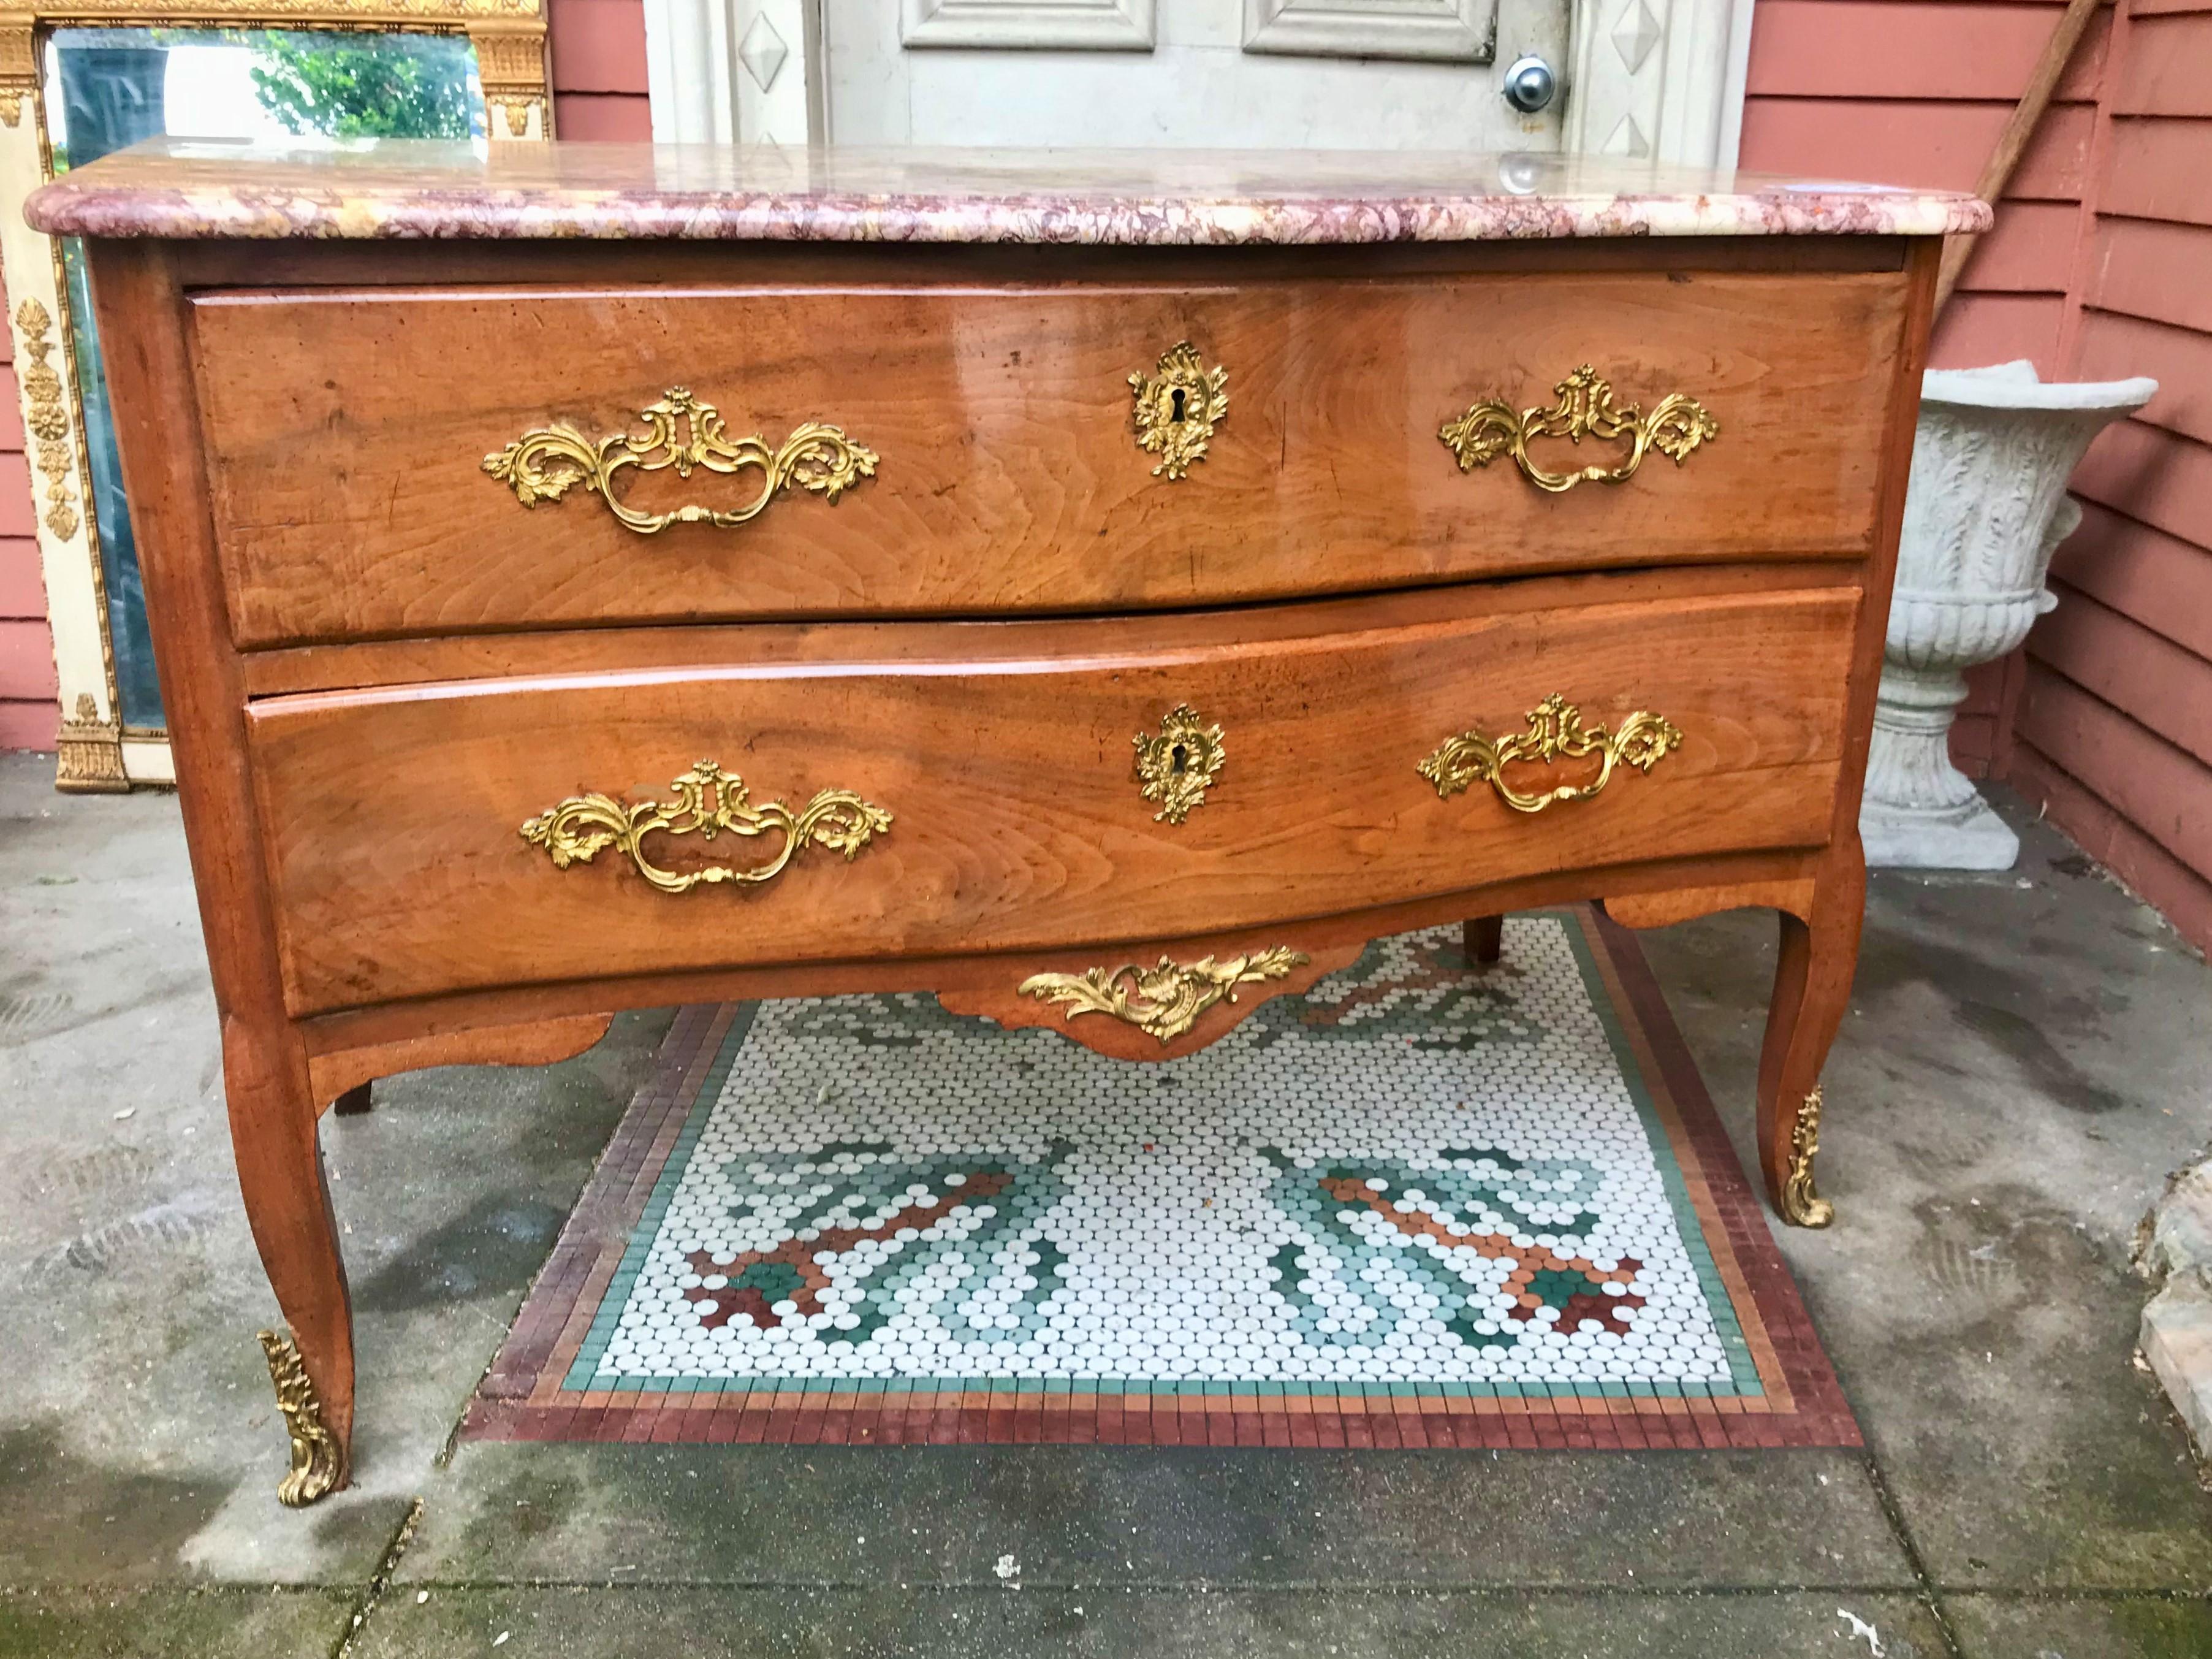 A Rococo  commode or chest with very fine original mercury fire gilt mounts. Nice faded cognac color. Simple clean lines and design. Marble top probably original and hand hewn (see rear shot.) Each side end has filled in age crack . Overall good